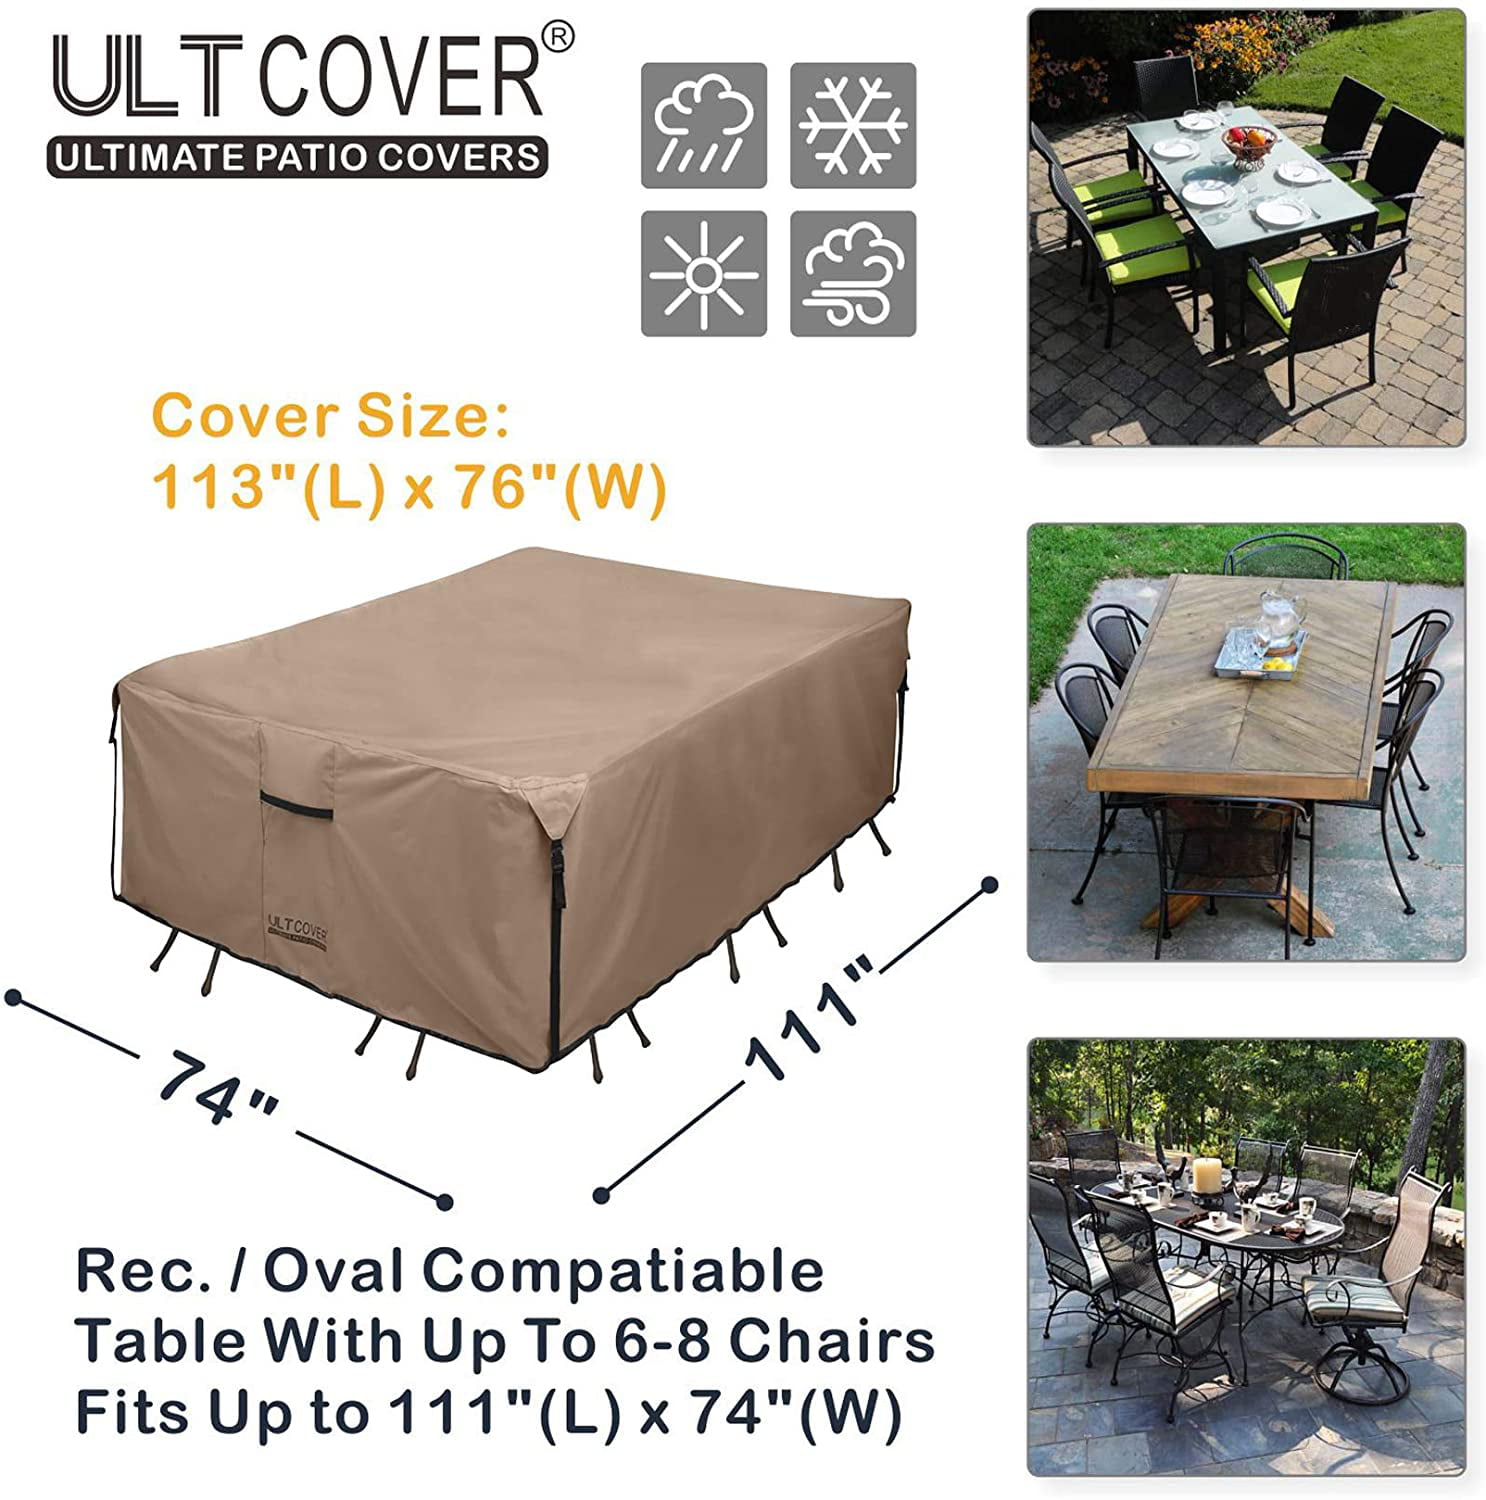 NEVERLAND Square Patio Table Cover Waterproof & UV-Resistant Outdoor Dining Table Chair Set Garden Rattan Furniture Cover Size 98L x 98W x 42H inch